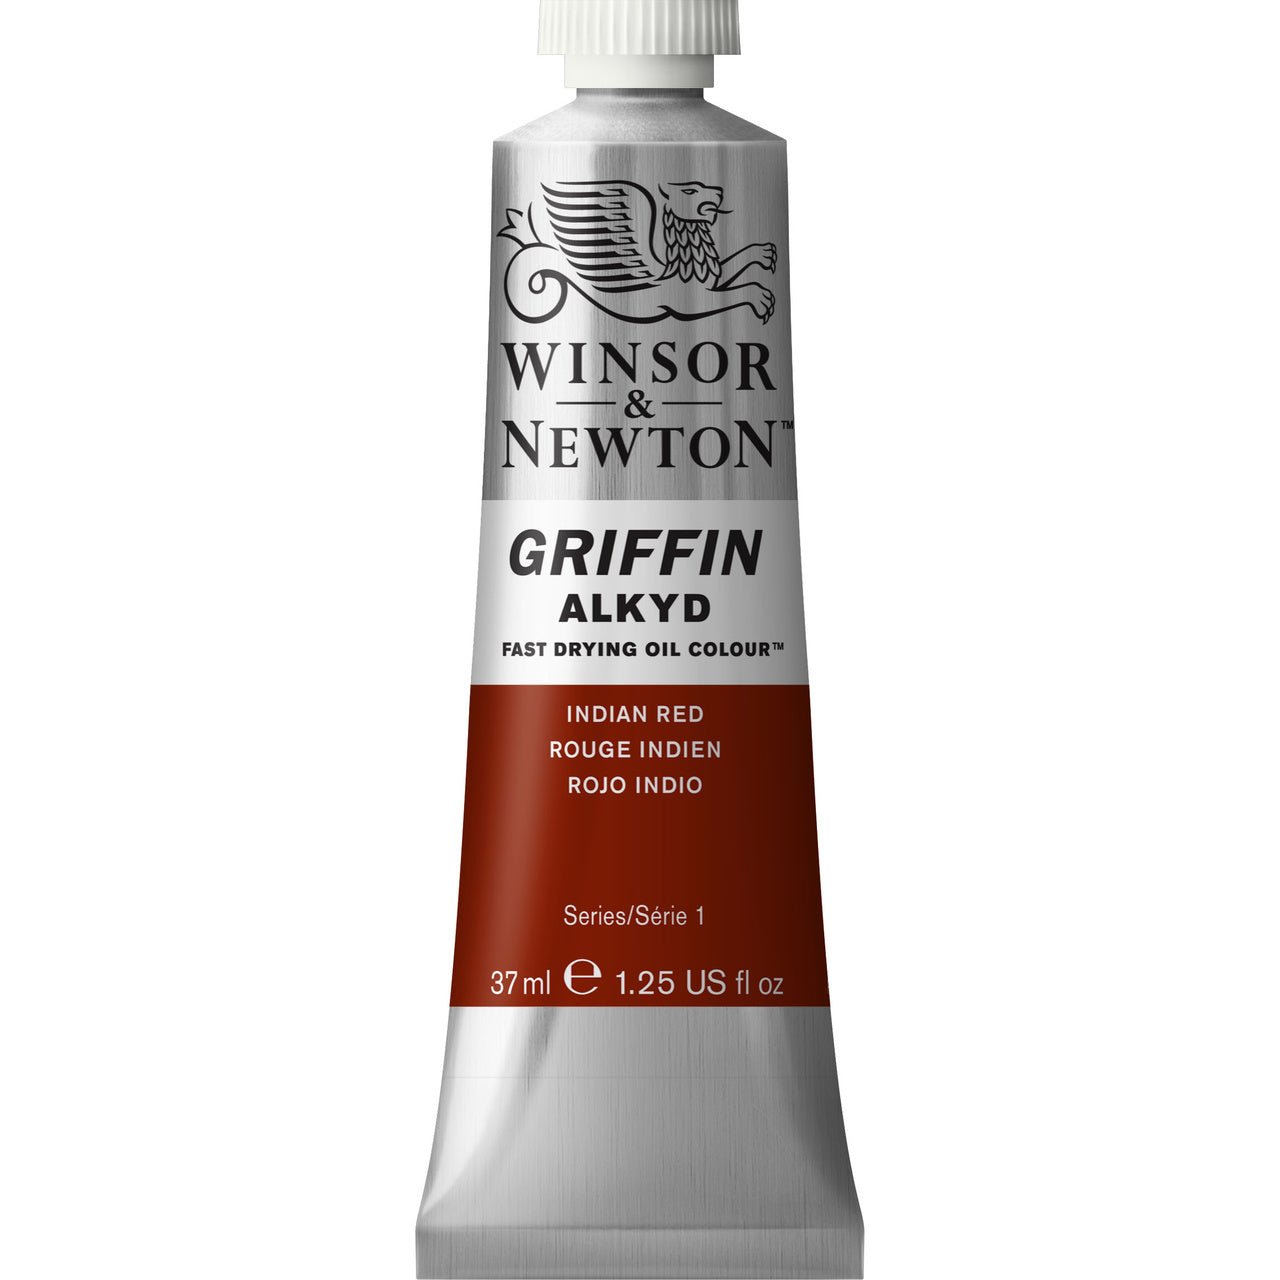 Winsor & Newton Griffin Alkyd 37ml Indian Red - merriartist.com